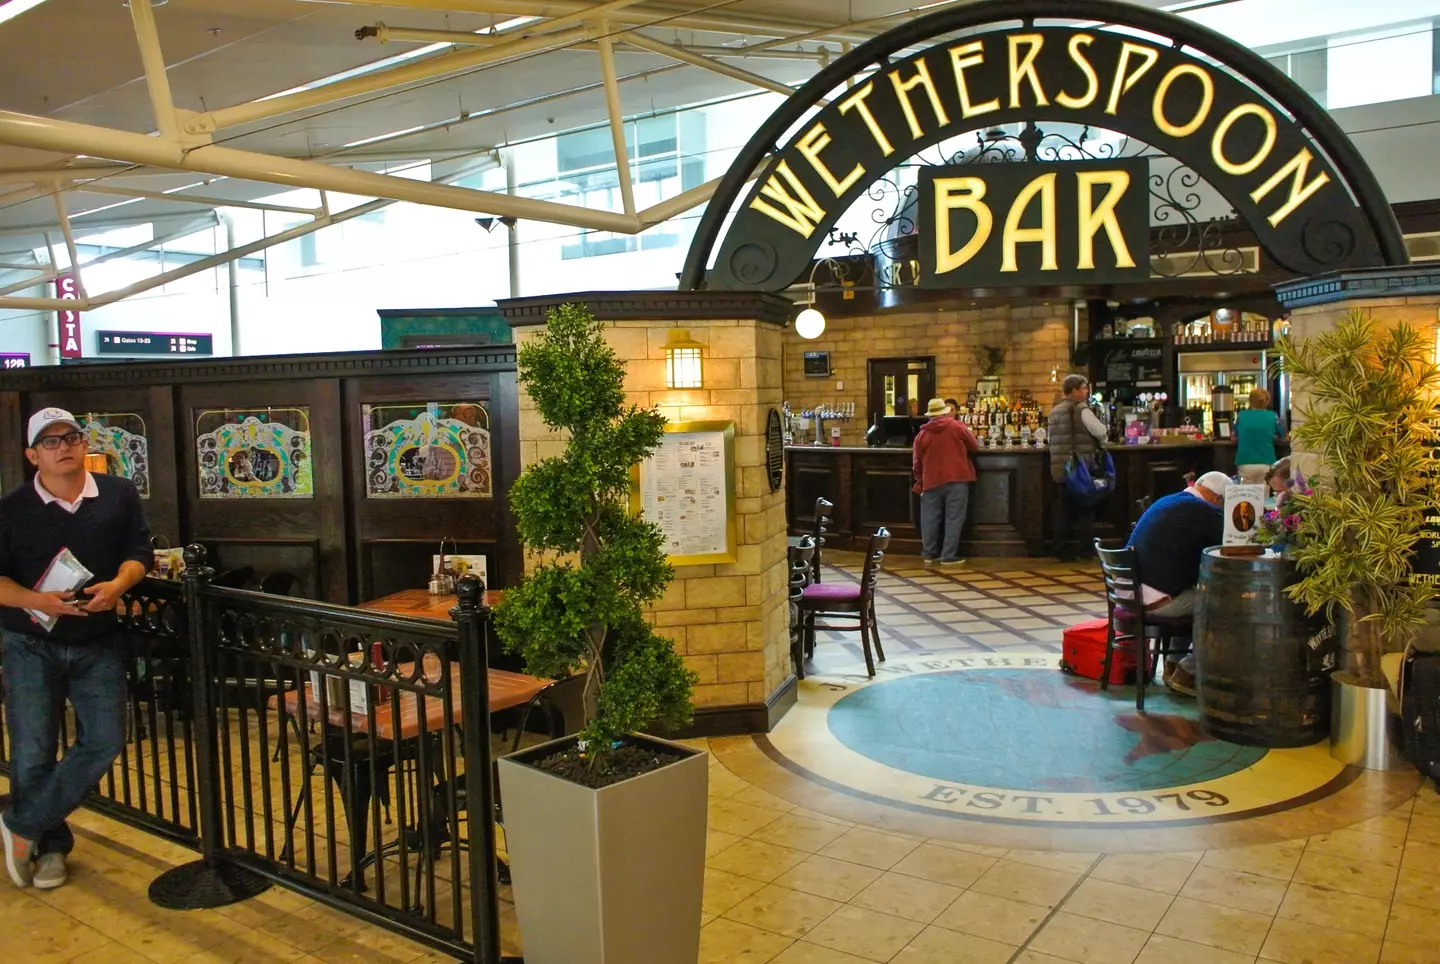 The bubbletiser is a new drink on the Wetherspoon menu.